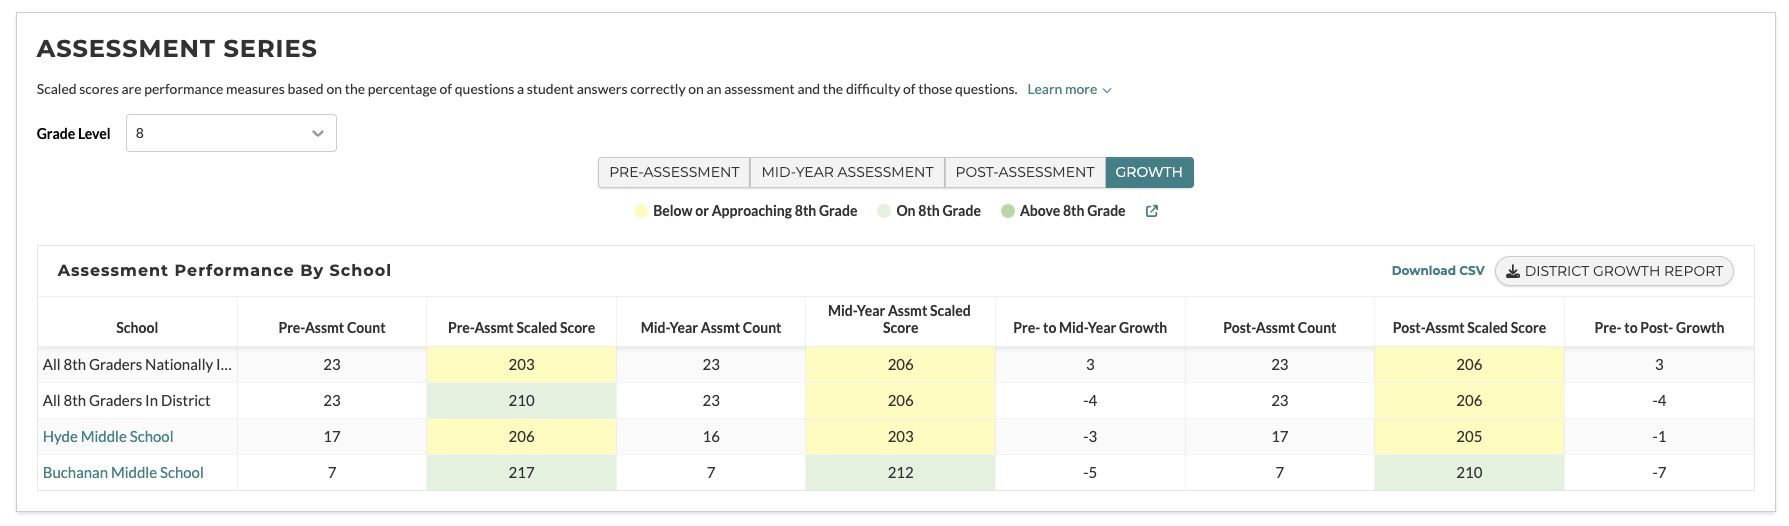 Assessment Series data reports for schools.